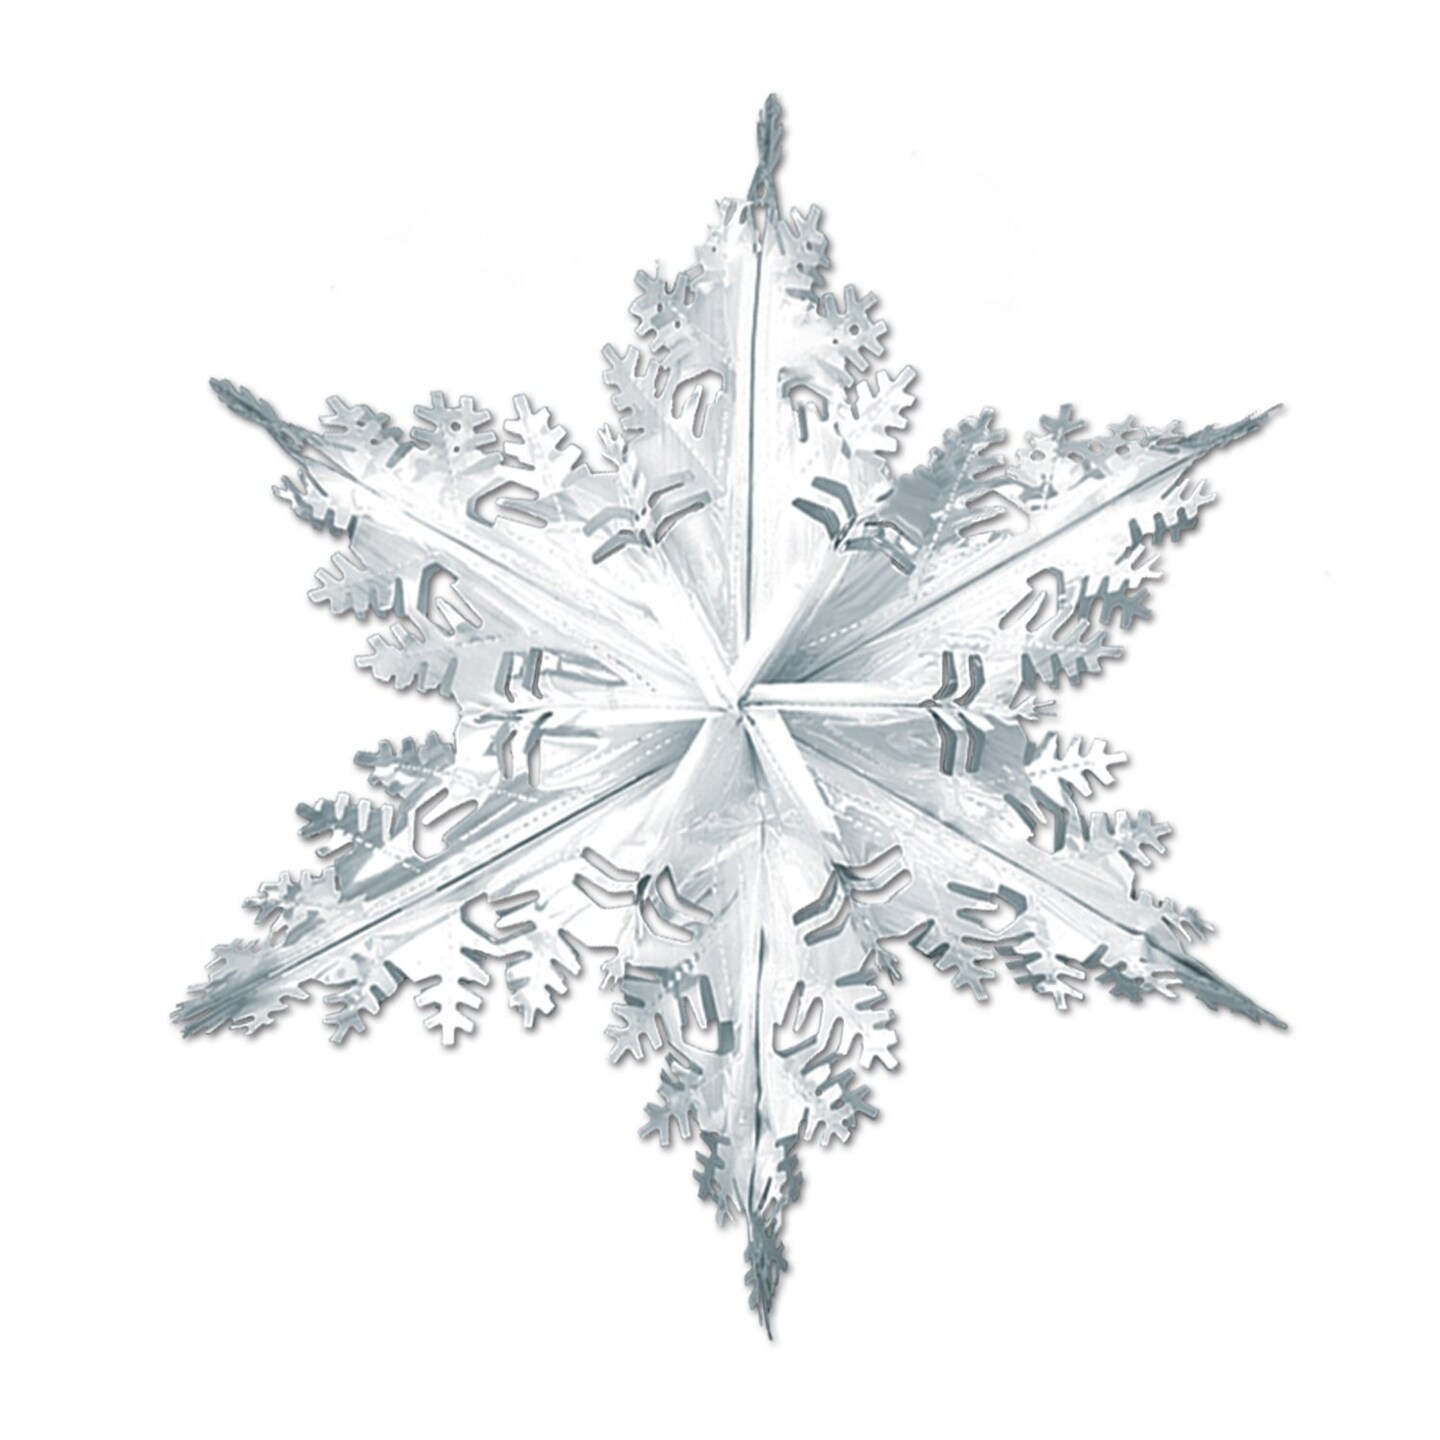 Snowflake Stickers (Pack of 12)